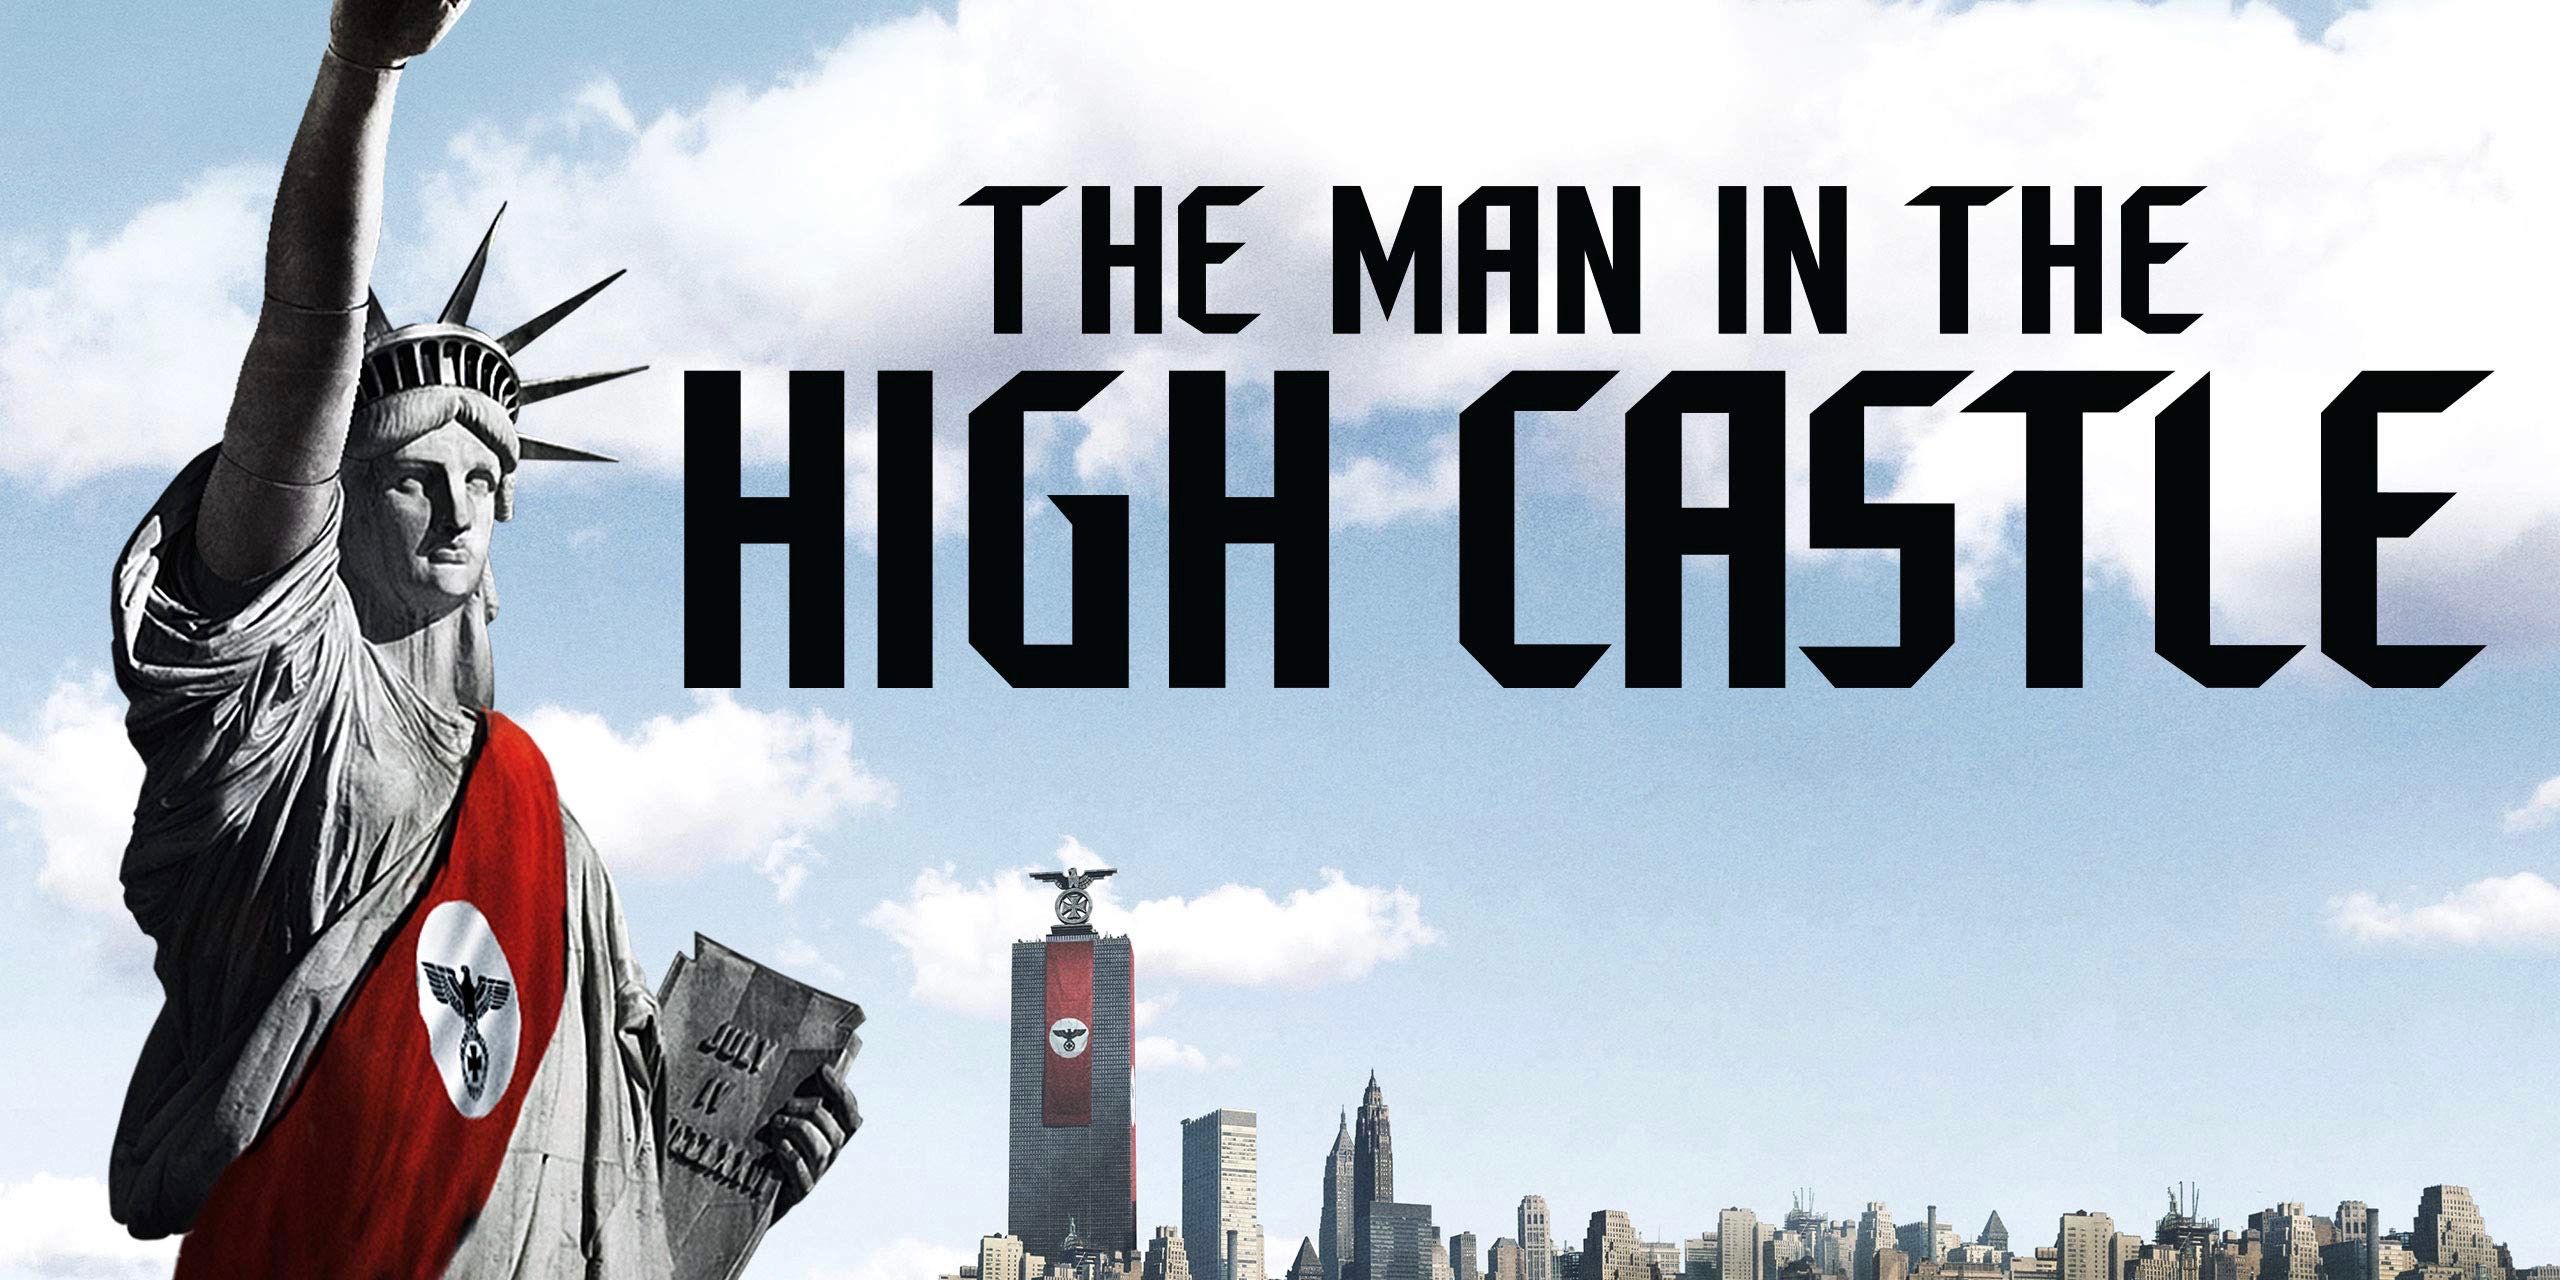 A promo image for The Man in the High Castle.